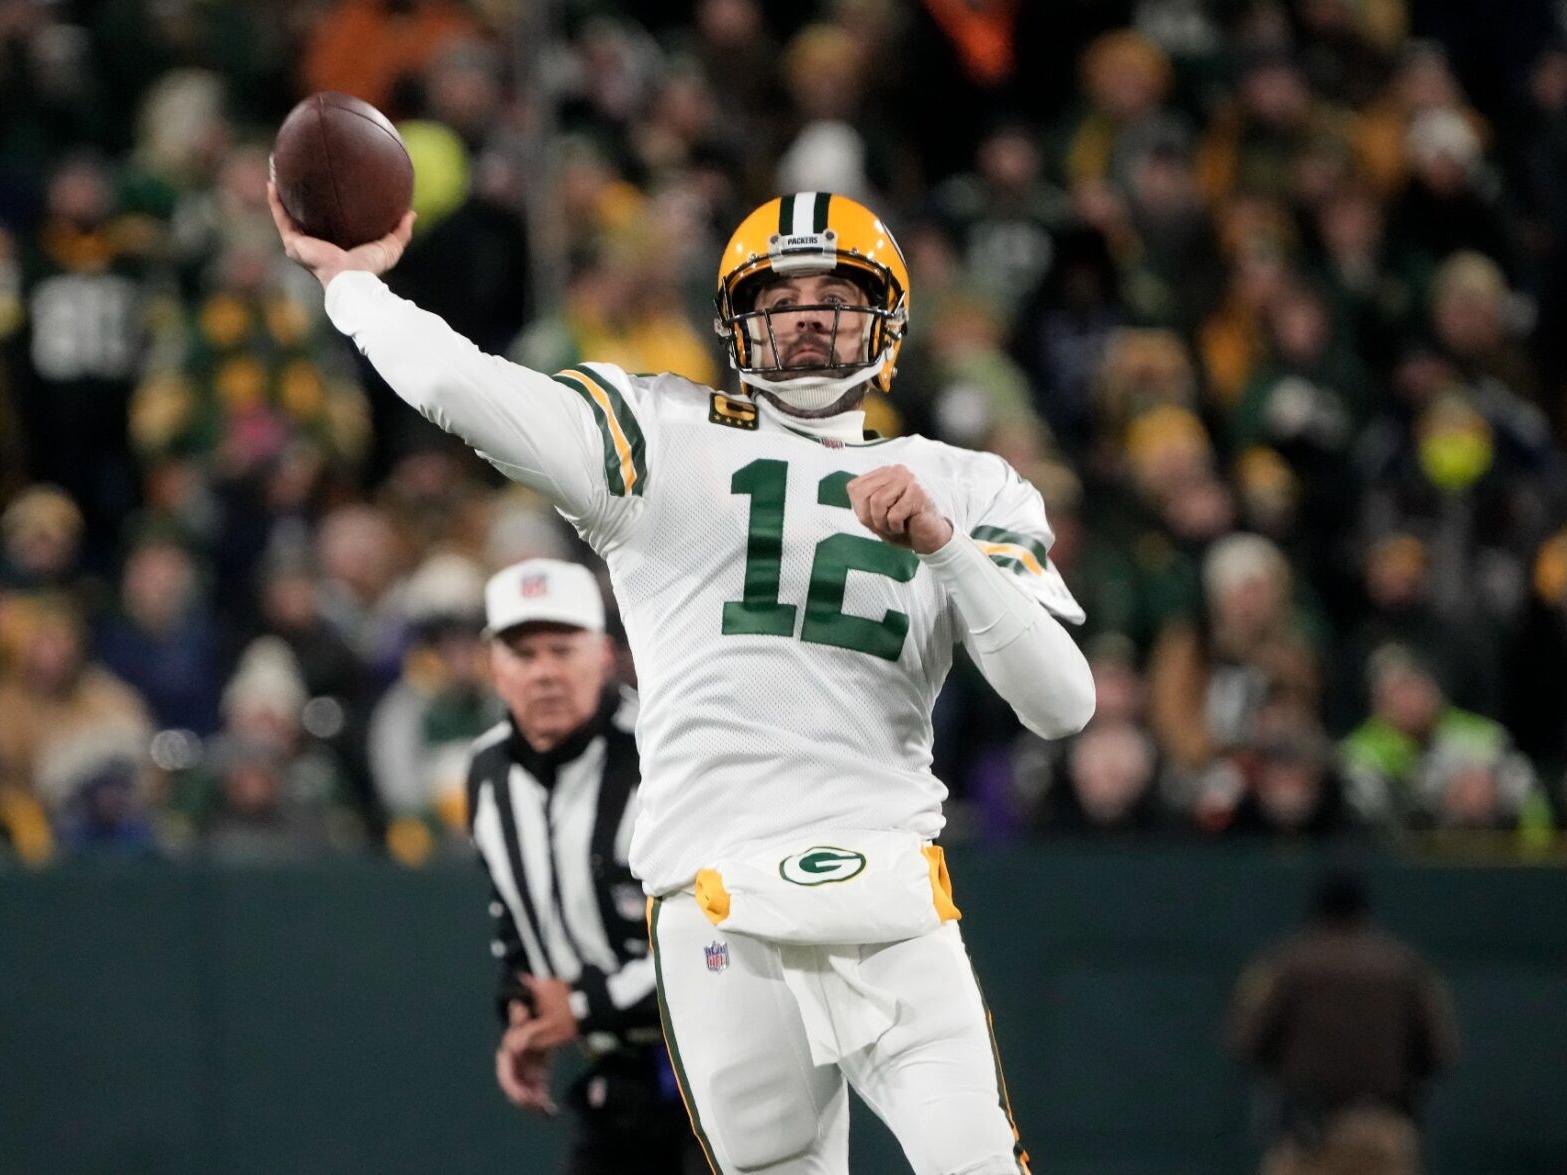 3 Best Prop Bets for Packers vs Eagles Sunday Night Football Week